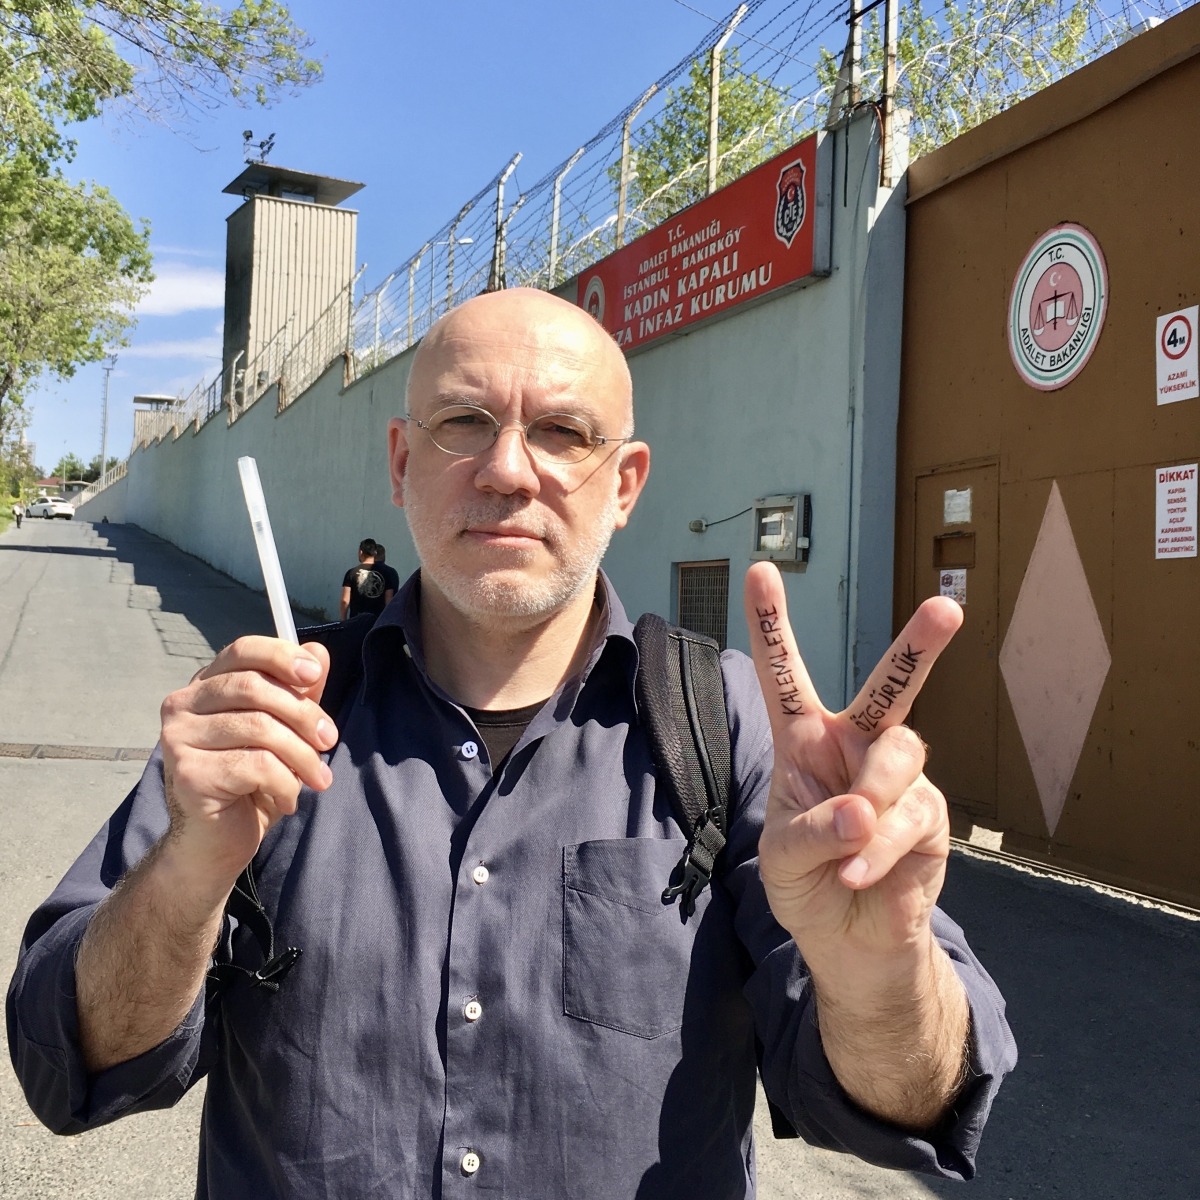 April 15, 2016. In front of Bakirköy Women’s Prison, where my colleague and dear friend Esra Mungan, a professor of psychology at Boğaziçi University, was imprisoned. The writing on my fingers reads: “Freedom for Pens,” meaning freedom for those who express their thoughts in writing, which is a basic right.